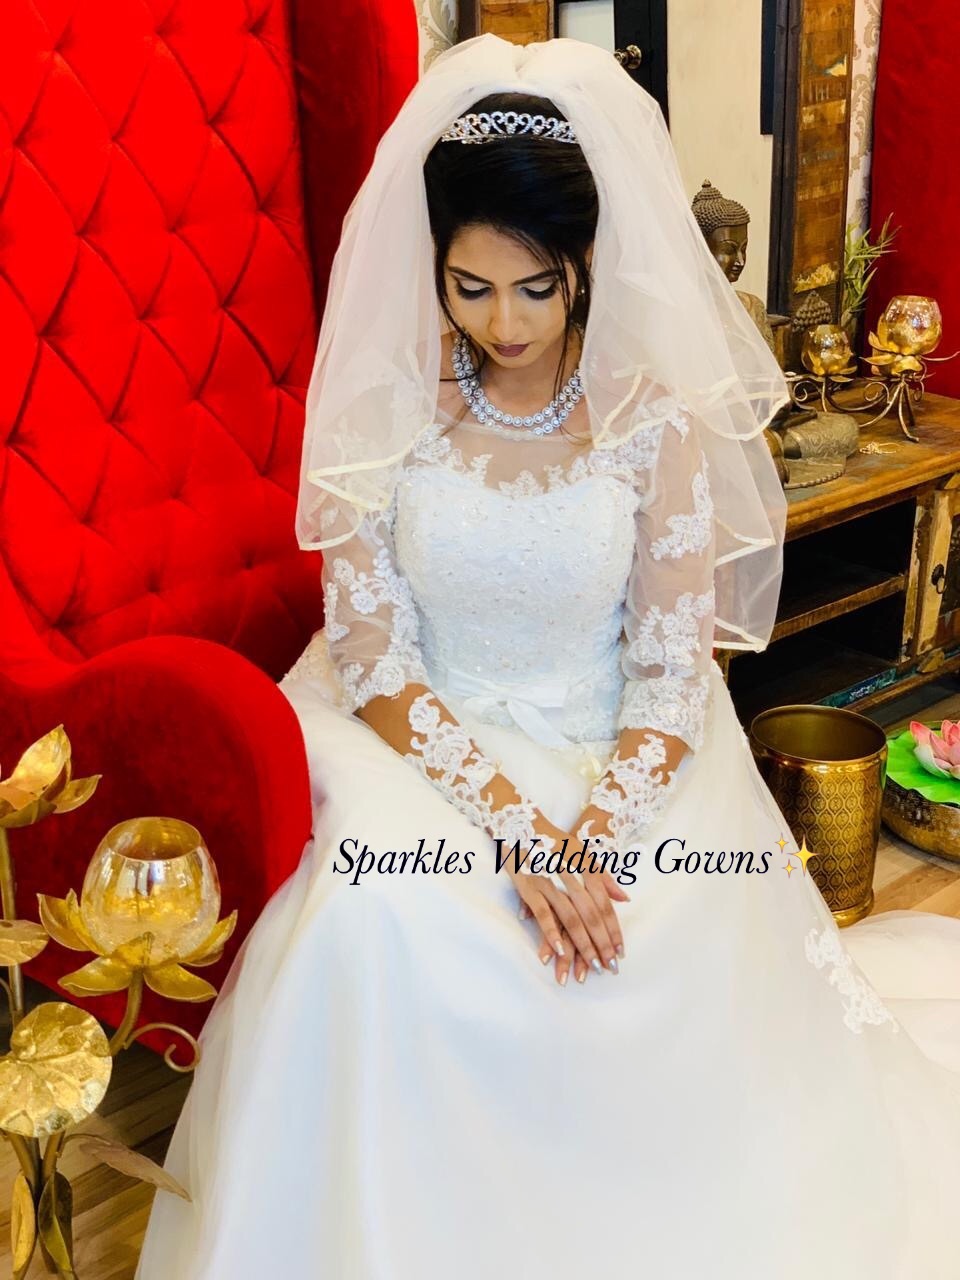 WEDDING GOWN MANUFACTURERS IN BANGALORE | SPARKLES WEDDING GOWNS  | GOWNS IN BANGALORE # BRIDAL GOWNS IN BANGALORE#  WEDDING GOWN MANUFACTURERS#  WEDDING GOWN DESIGN#  GOWNS IN BANGALORE  #BRIDAL BOUTIQUE#  GOWN SHOP  # BRIDAL GOWN - GL106887